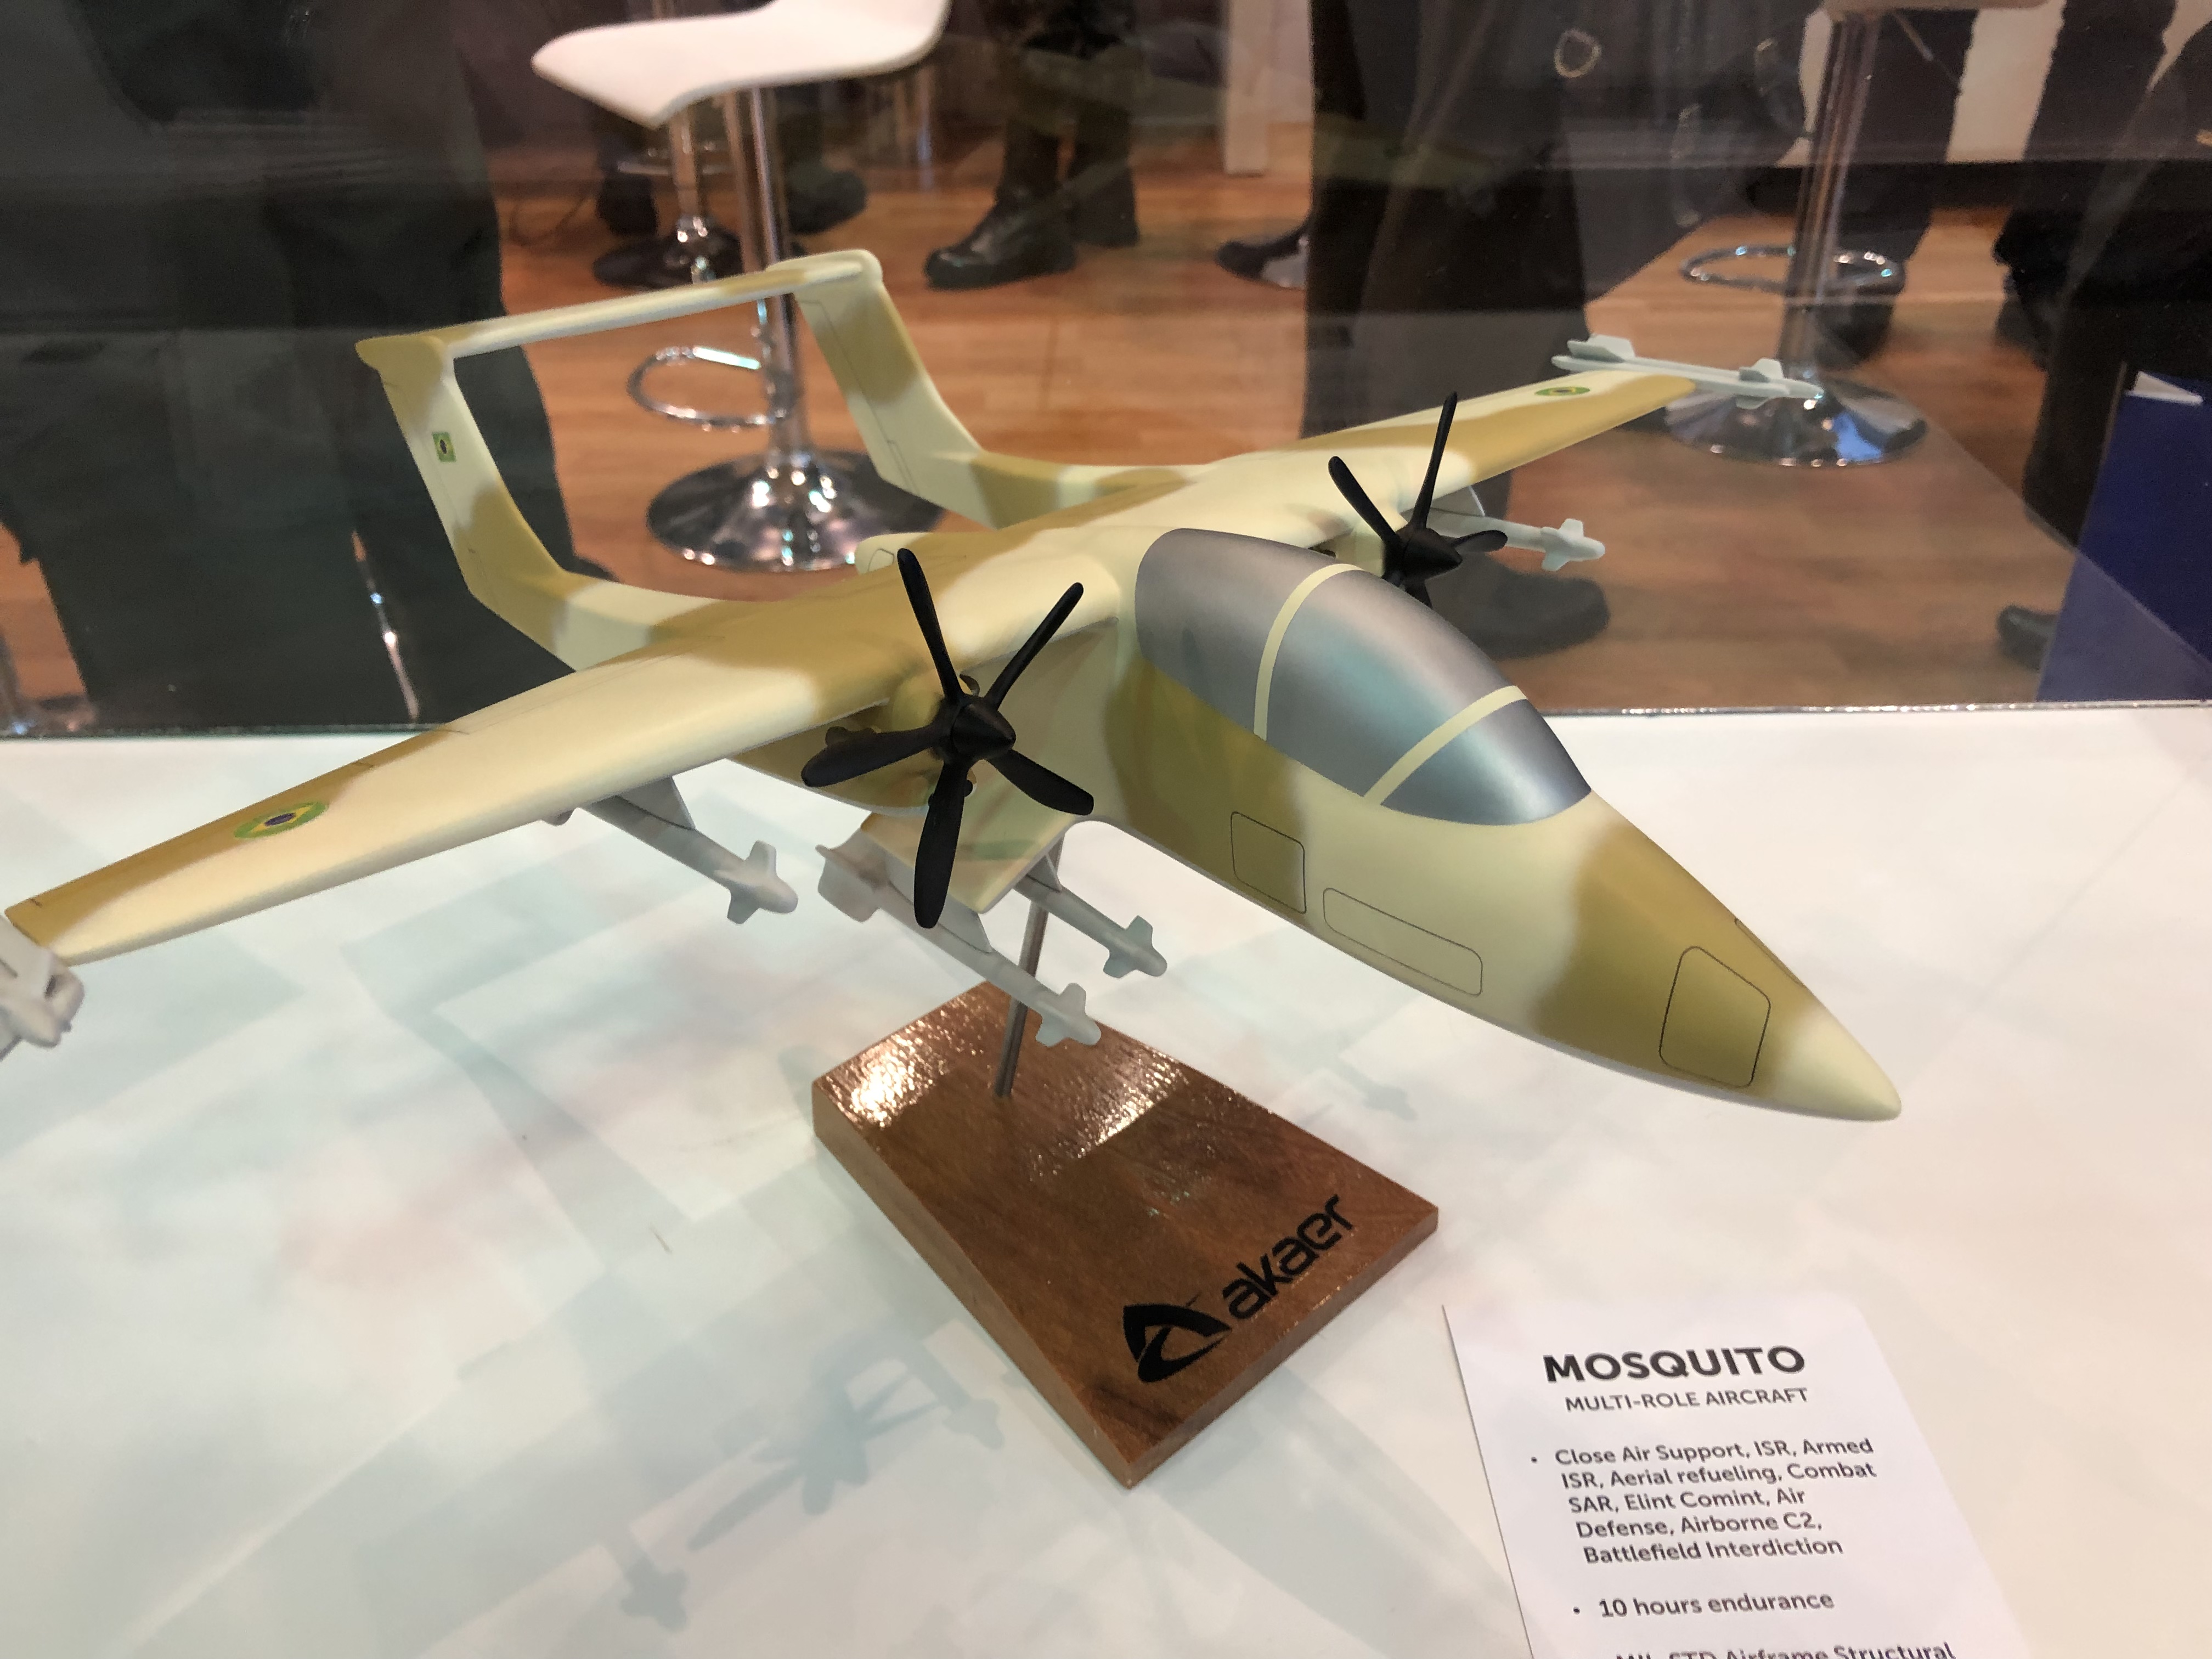 Akaer is showing a conceptual multi-role aircraft called Mosquito at the 2019 LAAD Defence and Security exposition. (IHS Markit/Pat Host)